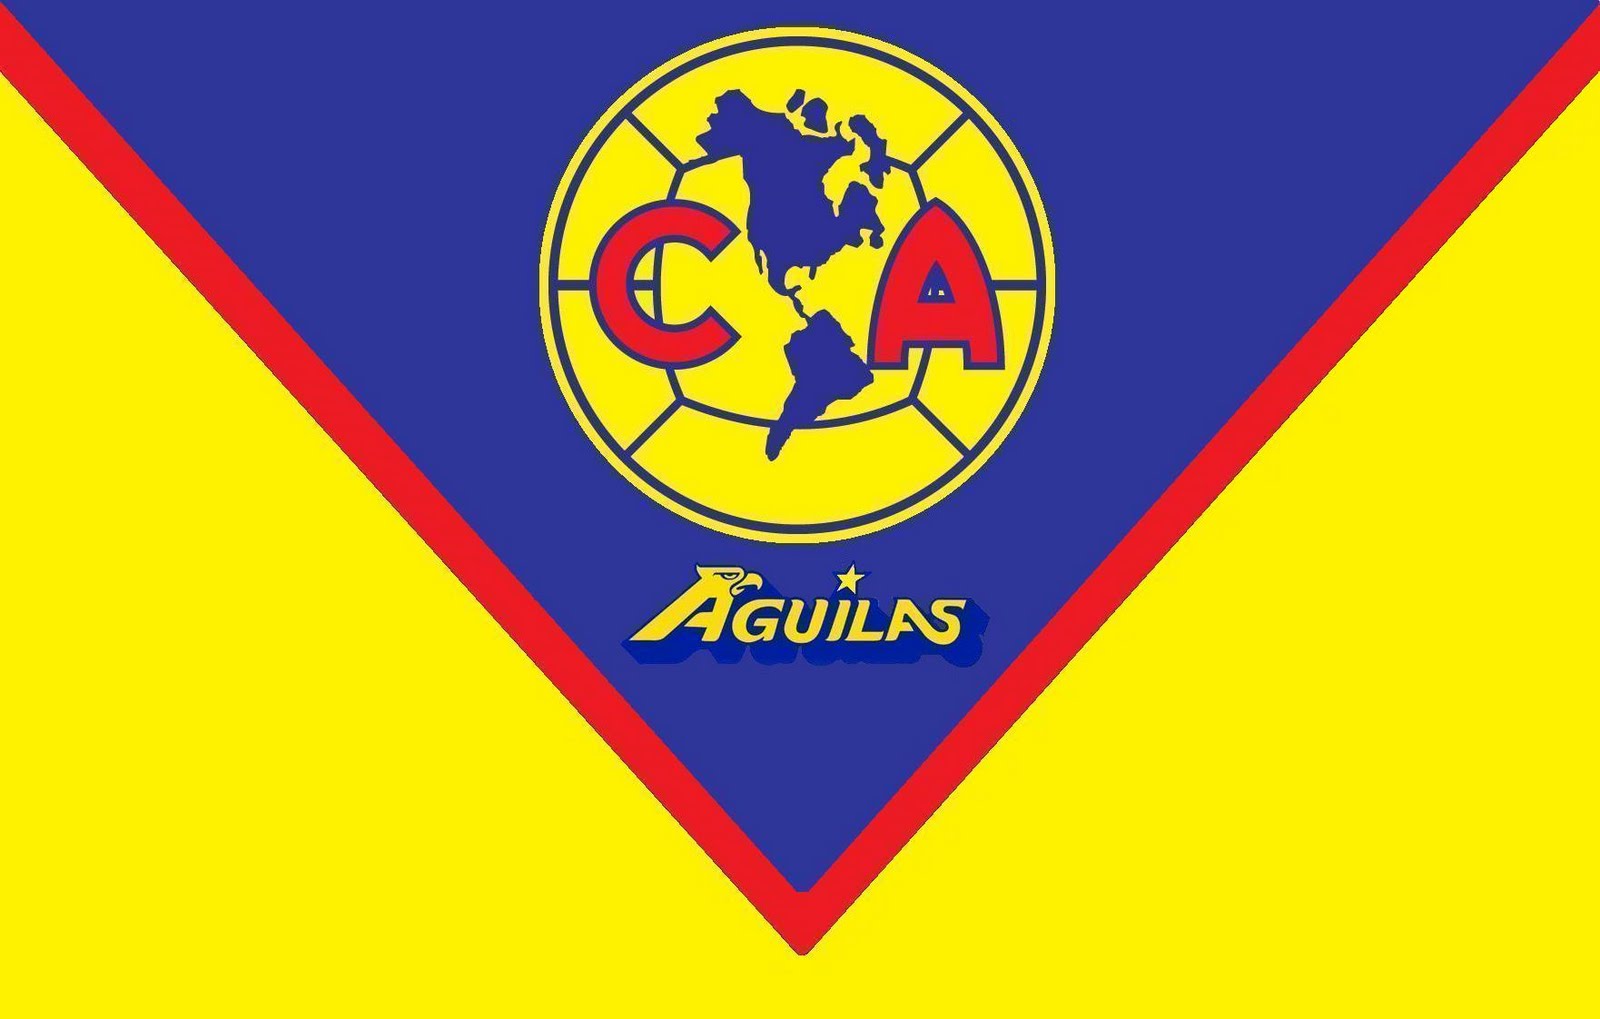 De c.v., commonly known as club américa or simply américa, is a professiona...